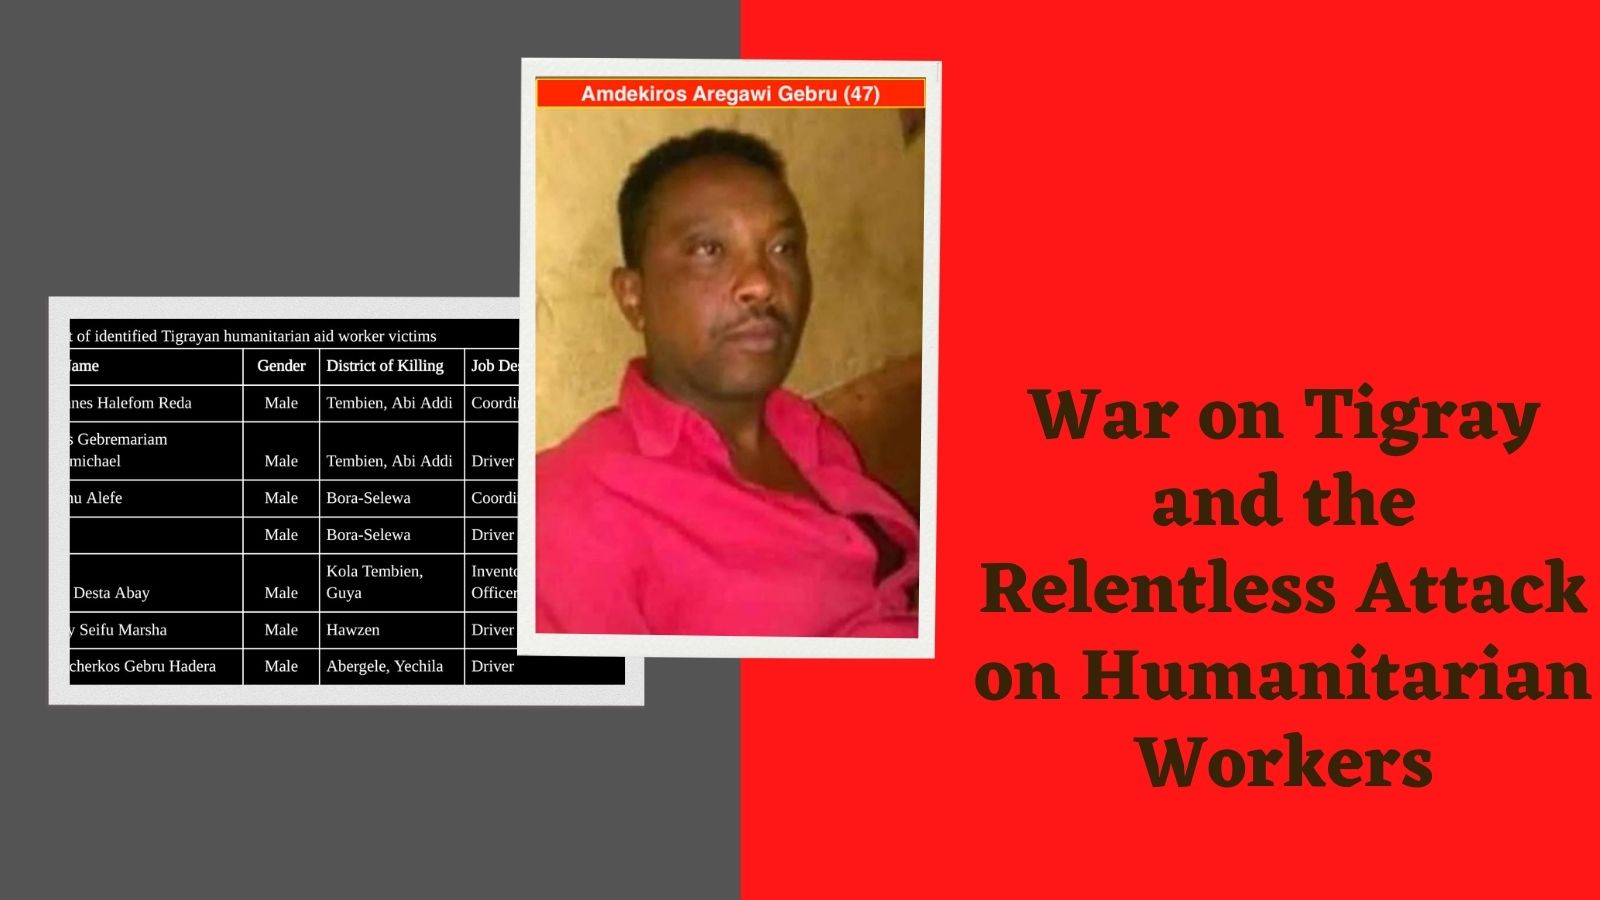 War on Tigray and the Relentless Attack on Humanitarian Workers